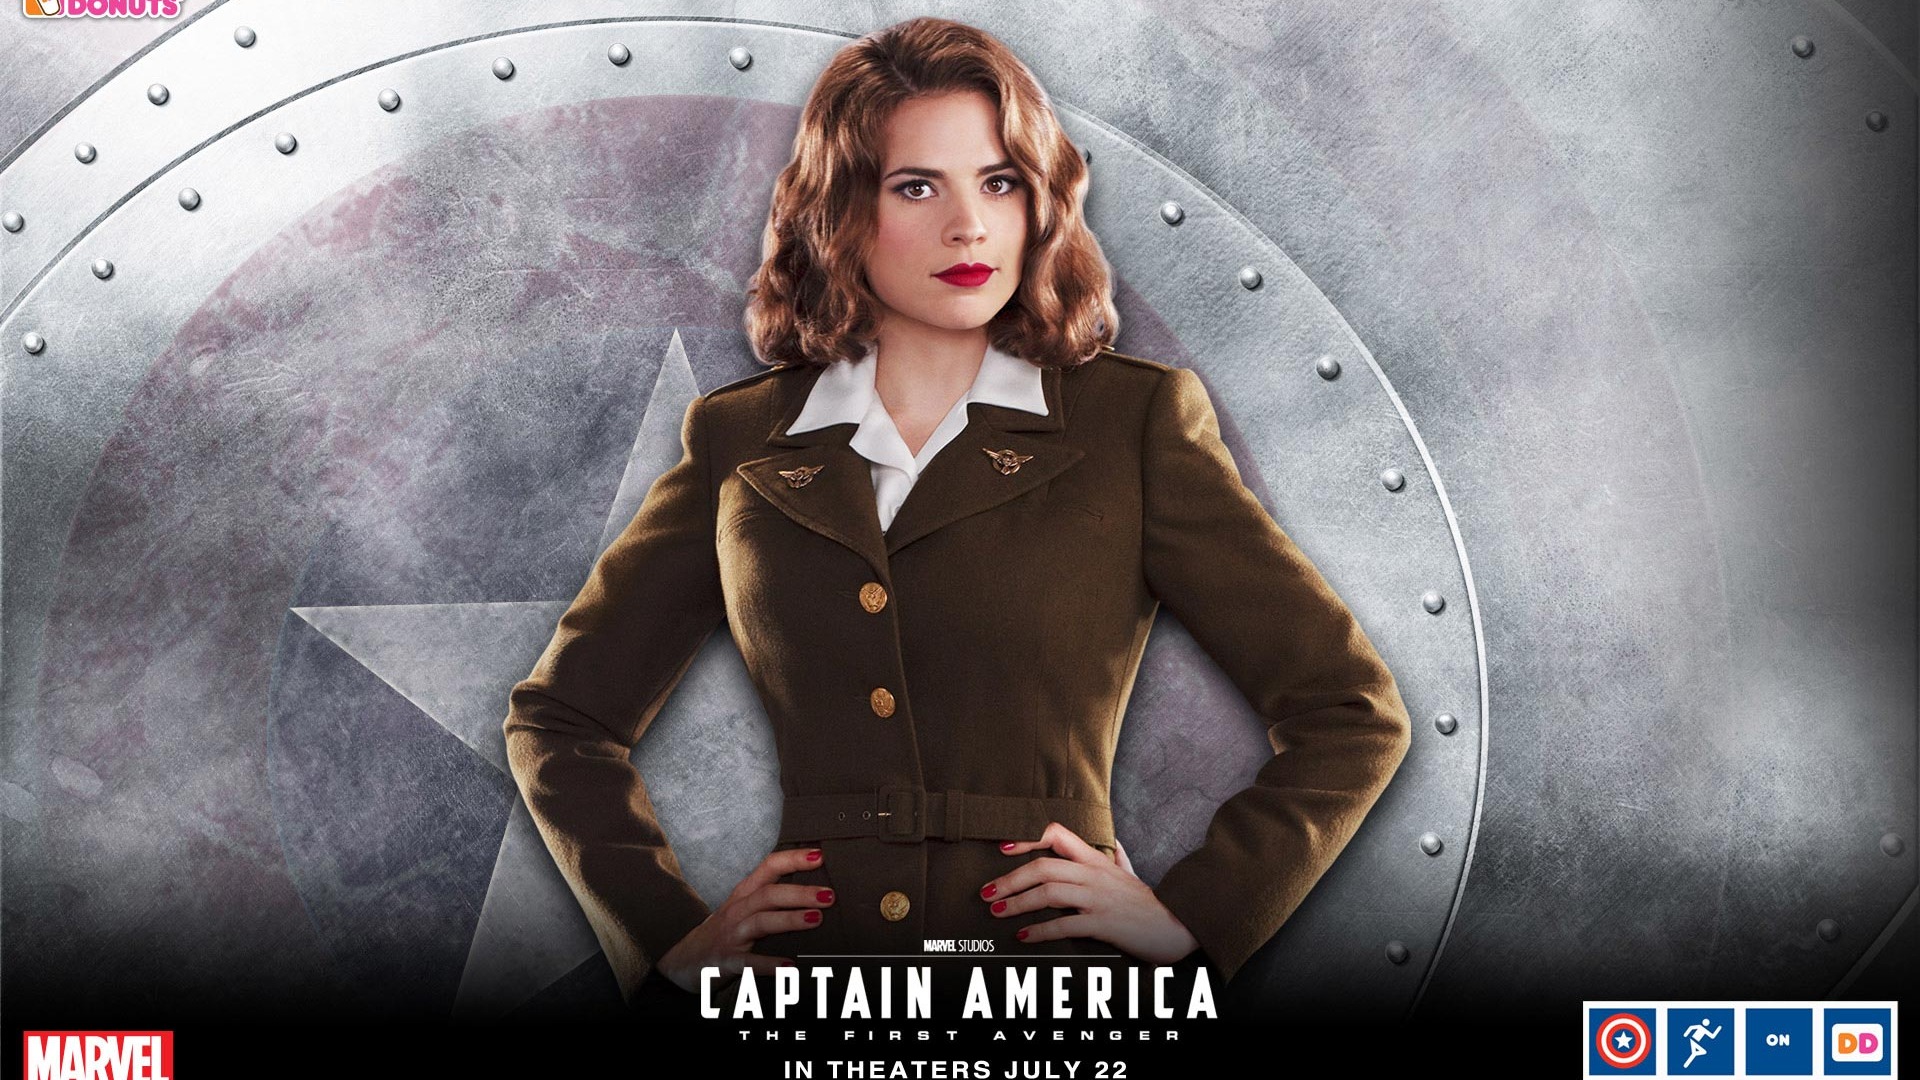 Captain America: The First Avenger wallpapers HD #8 - 1920x1080